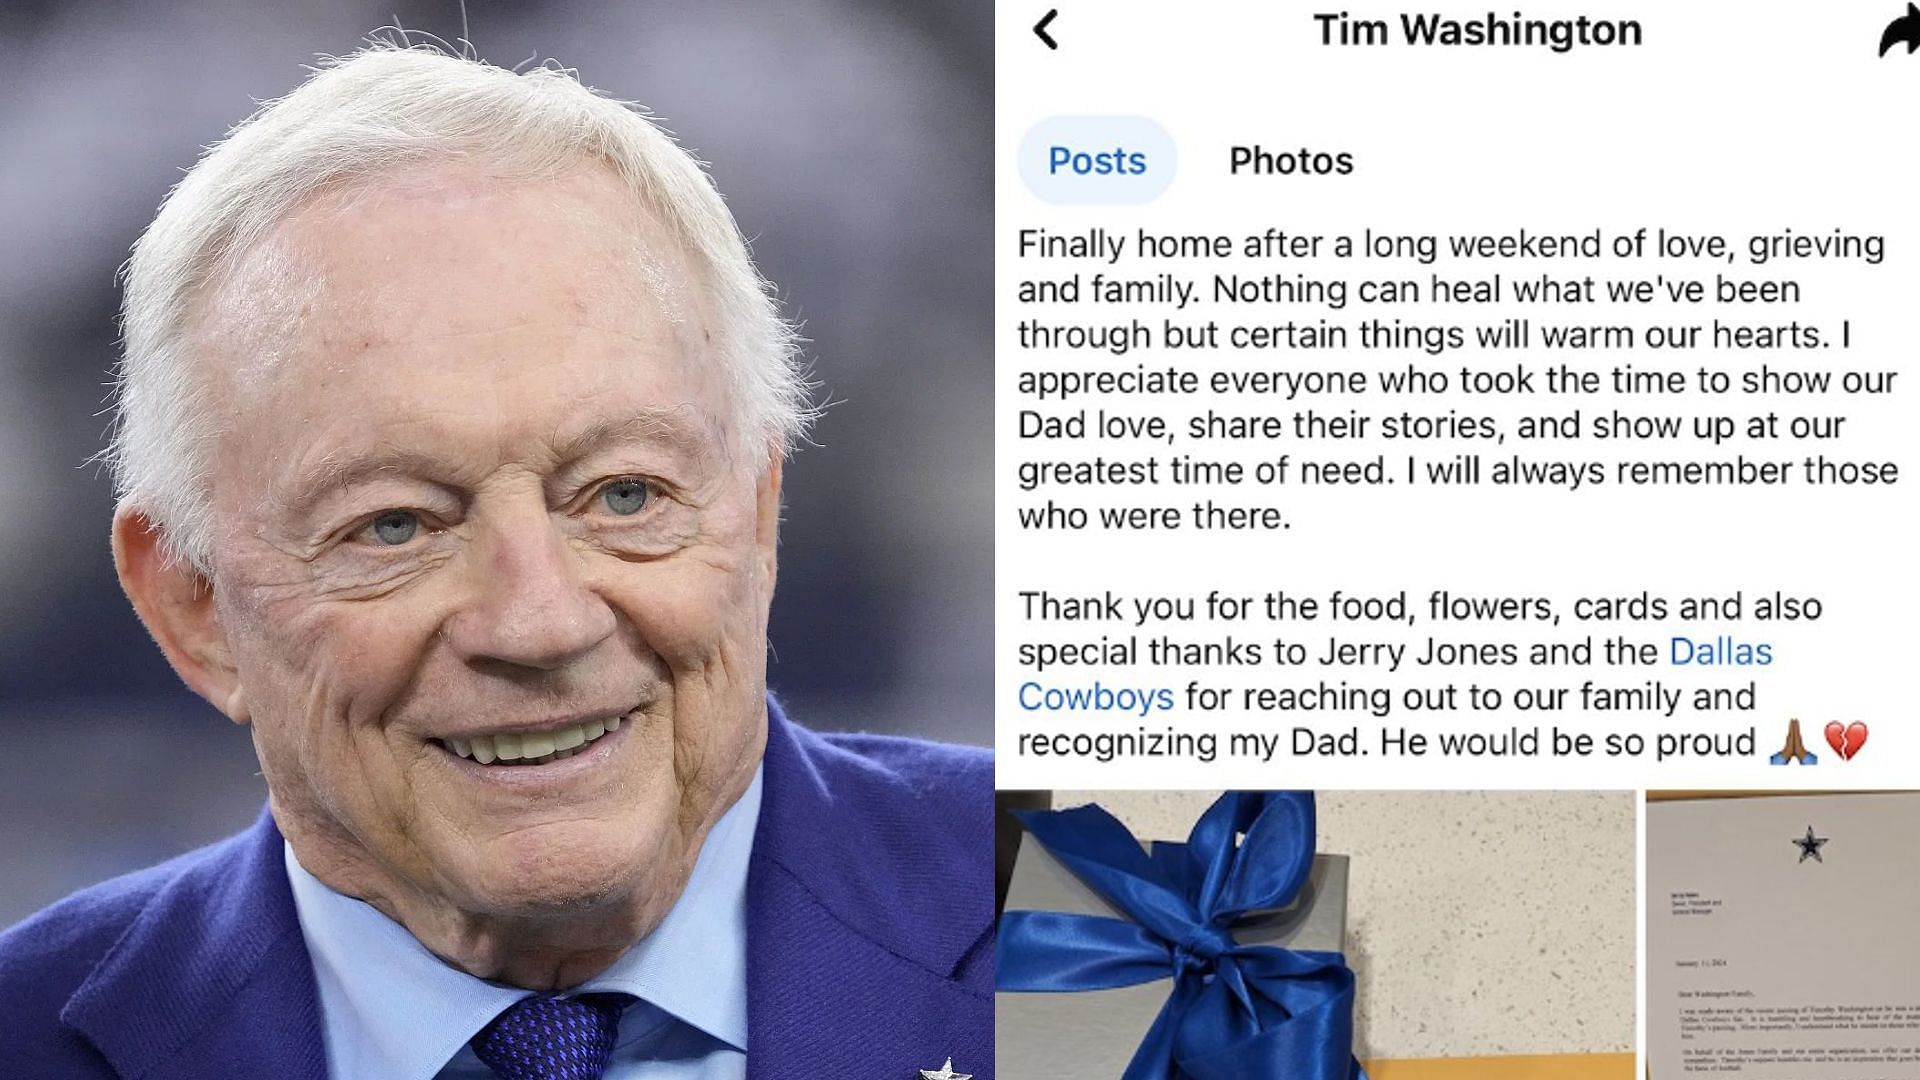 Jones has sent a heartfelt letter to a fan after his father passed.